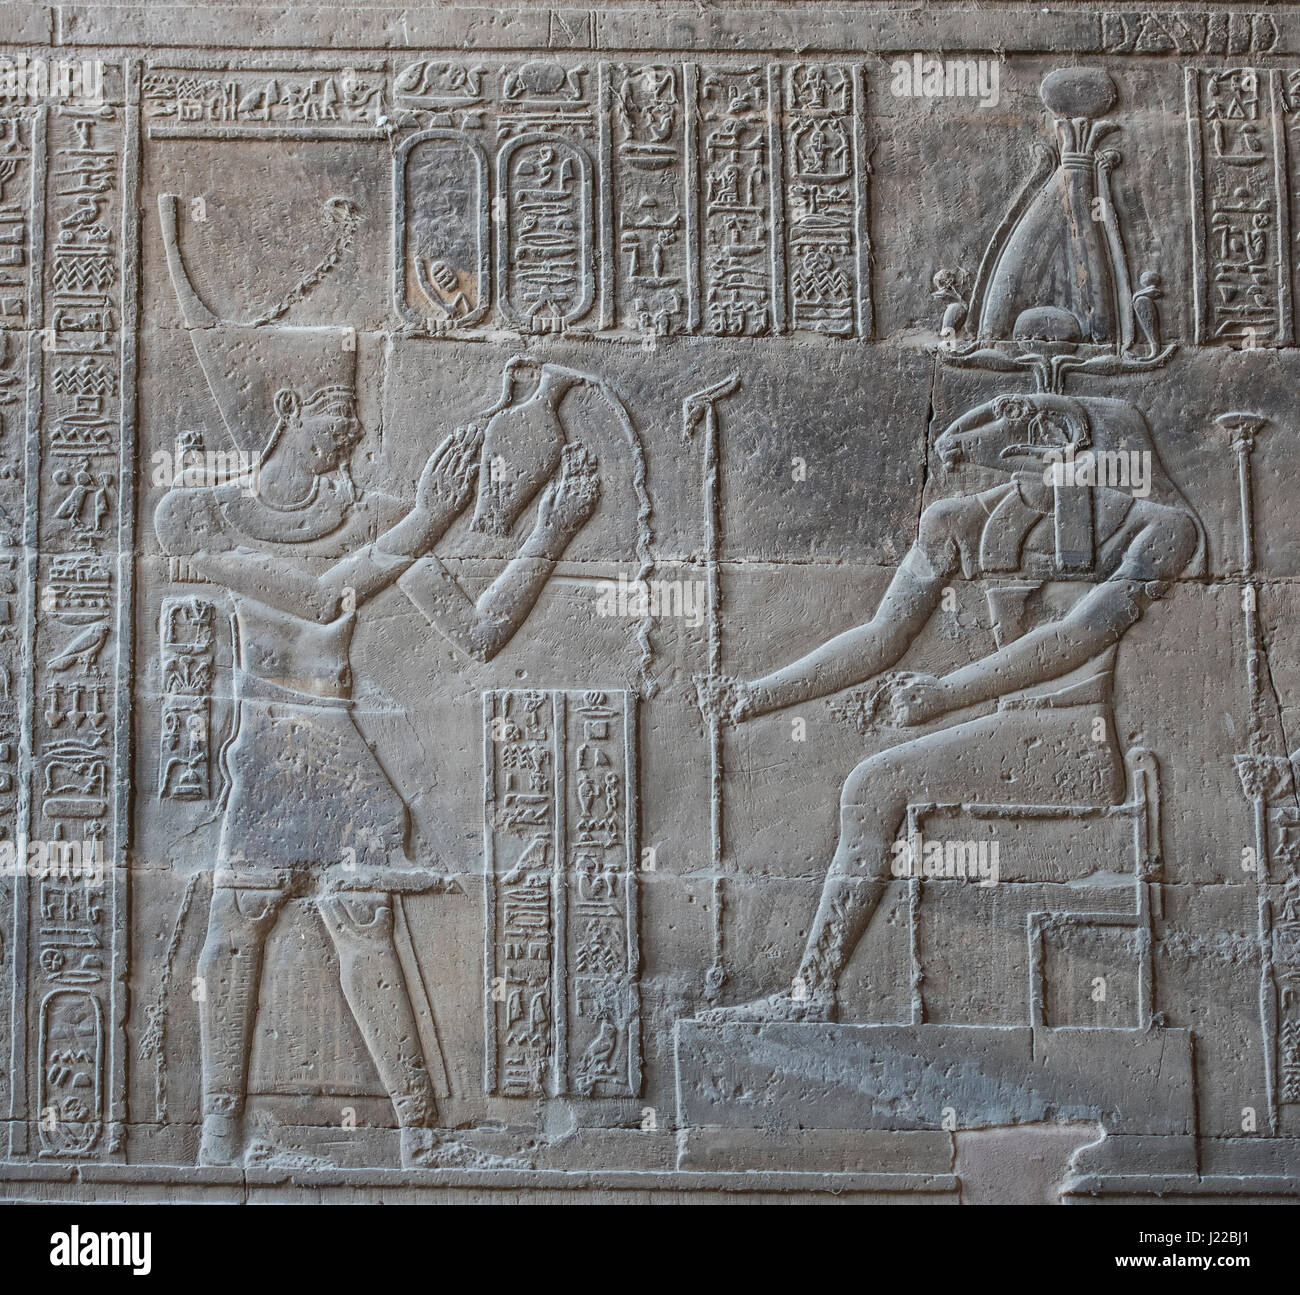 Hieroglypic carvings on wall at the ancient egyptian temple of Khnum in Esna Stock Photo